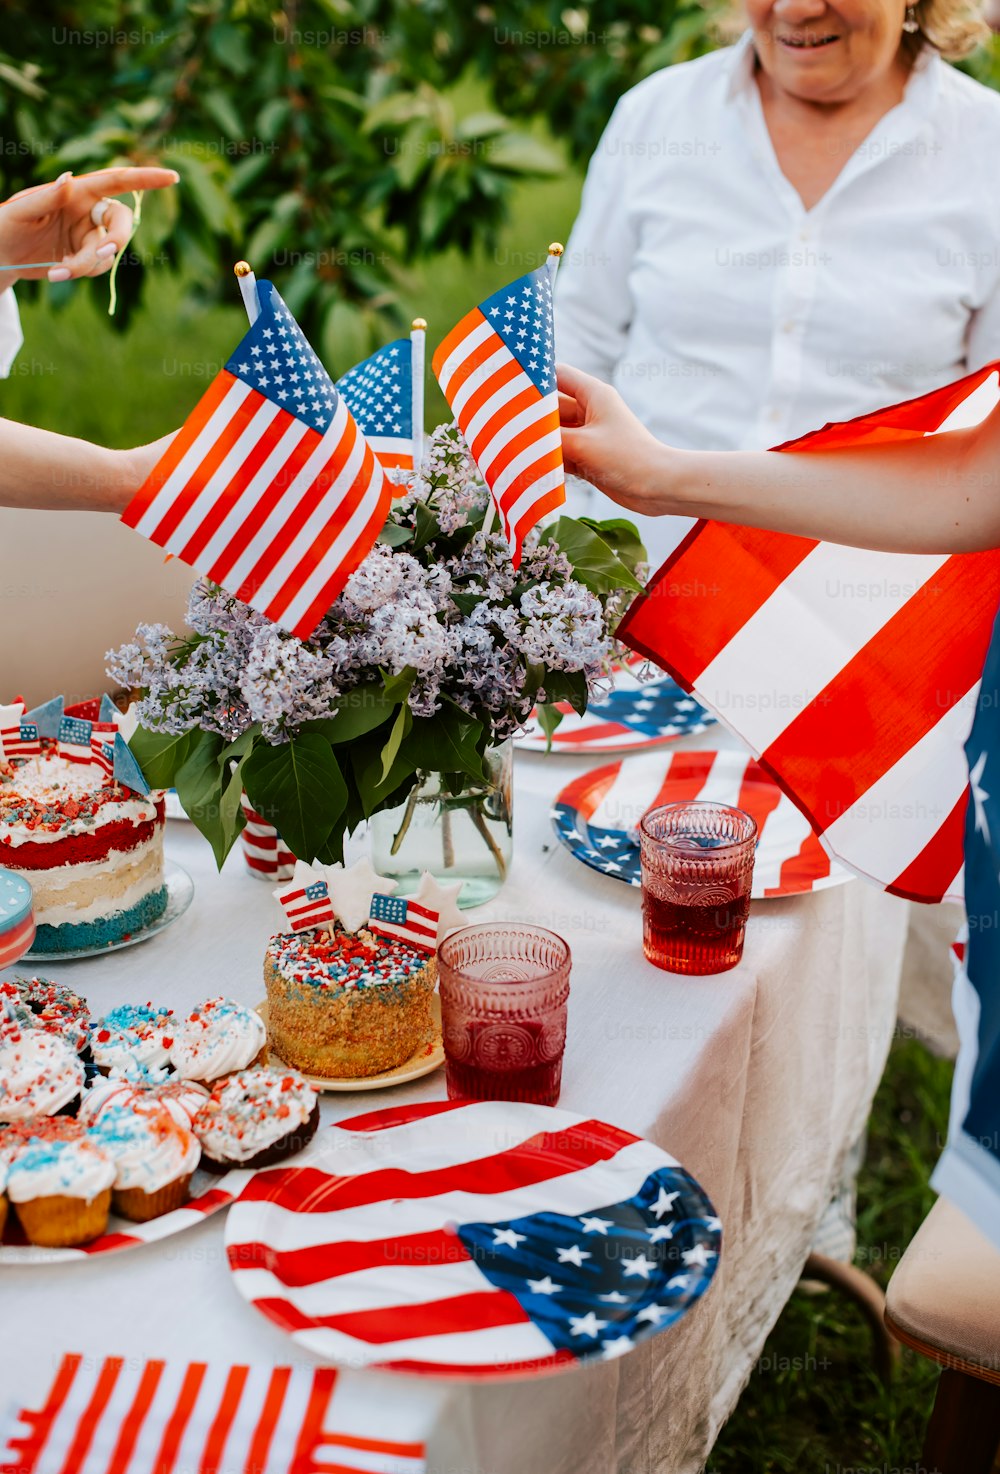 a table with american flags and cupcakes on it